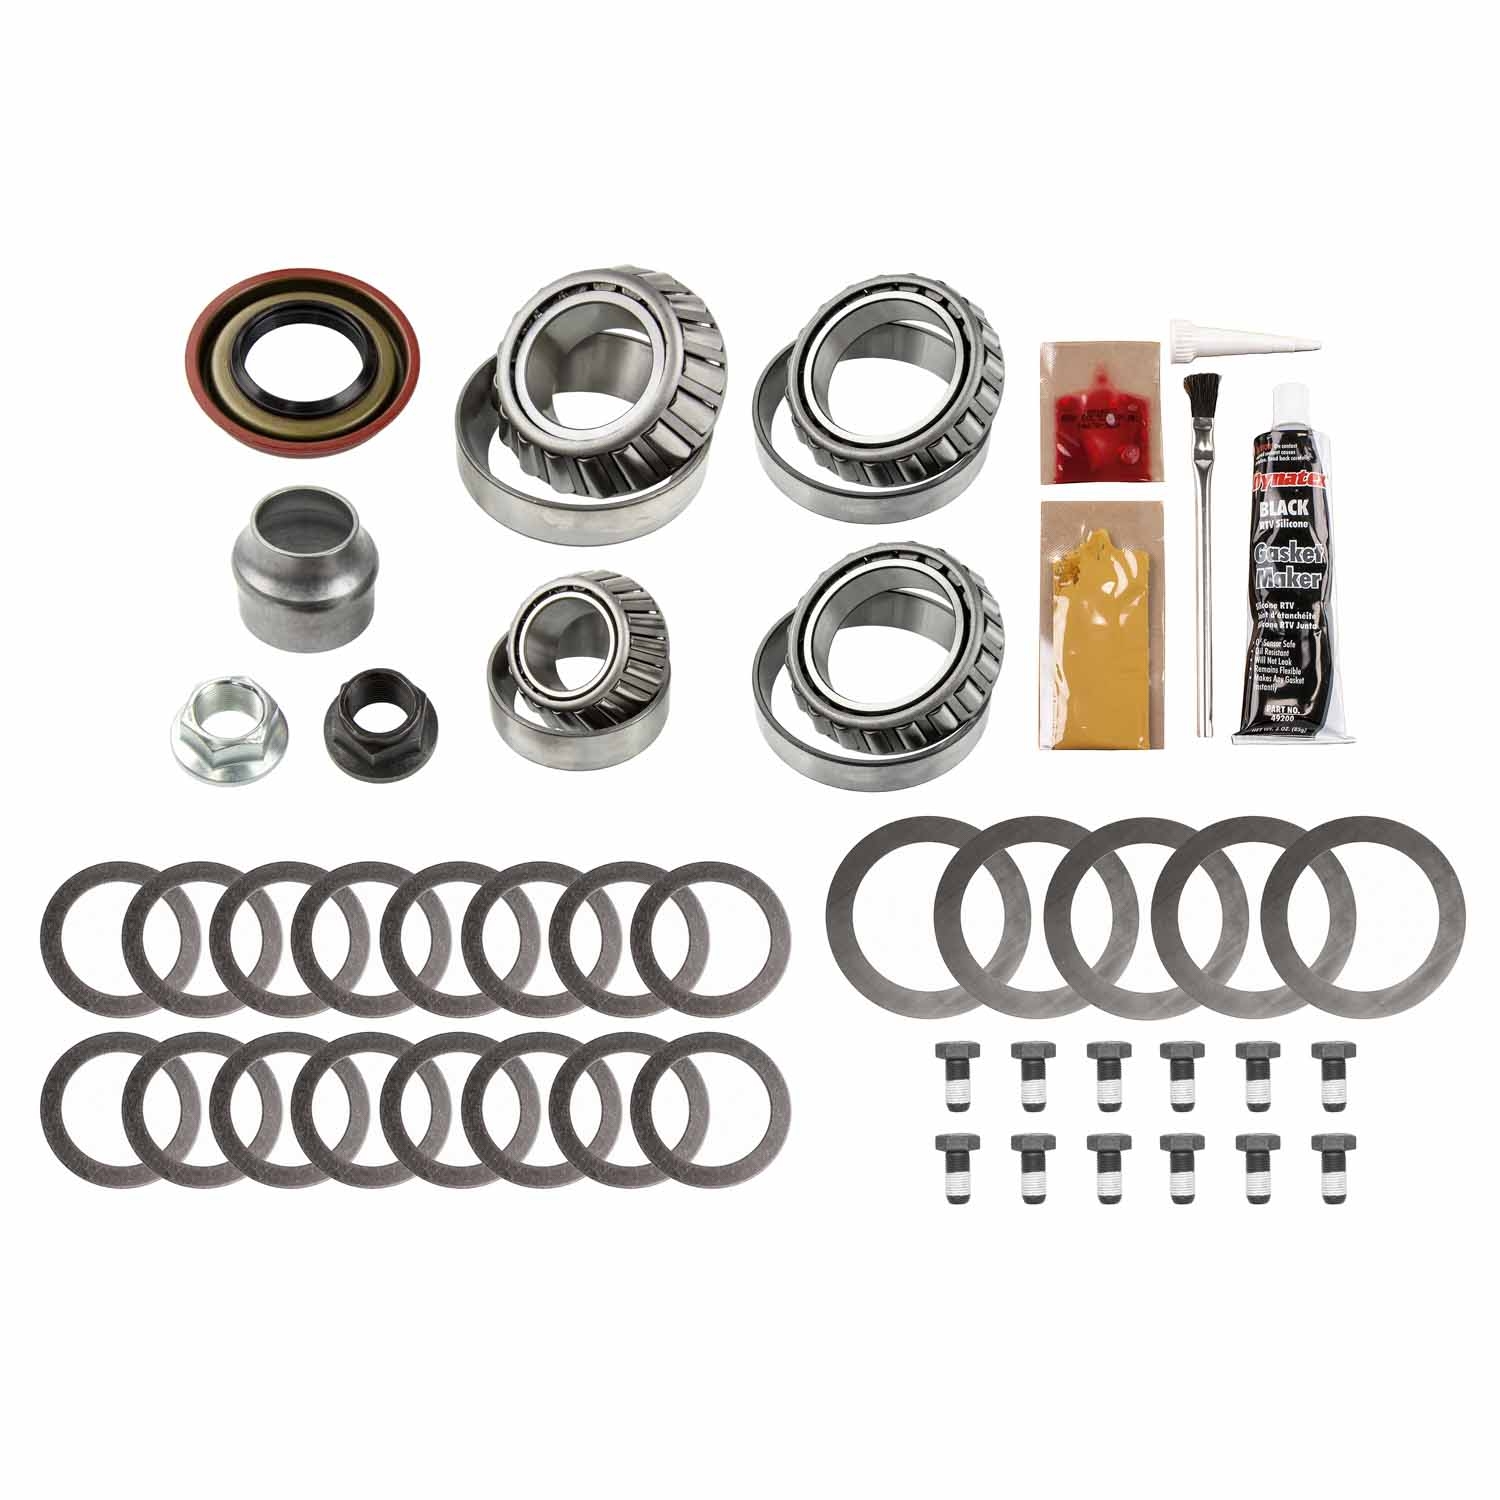 Motive Gear Differential Bearing Kits Ford 9.75 | Mk Ford 9.75